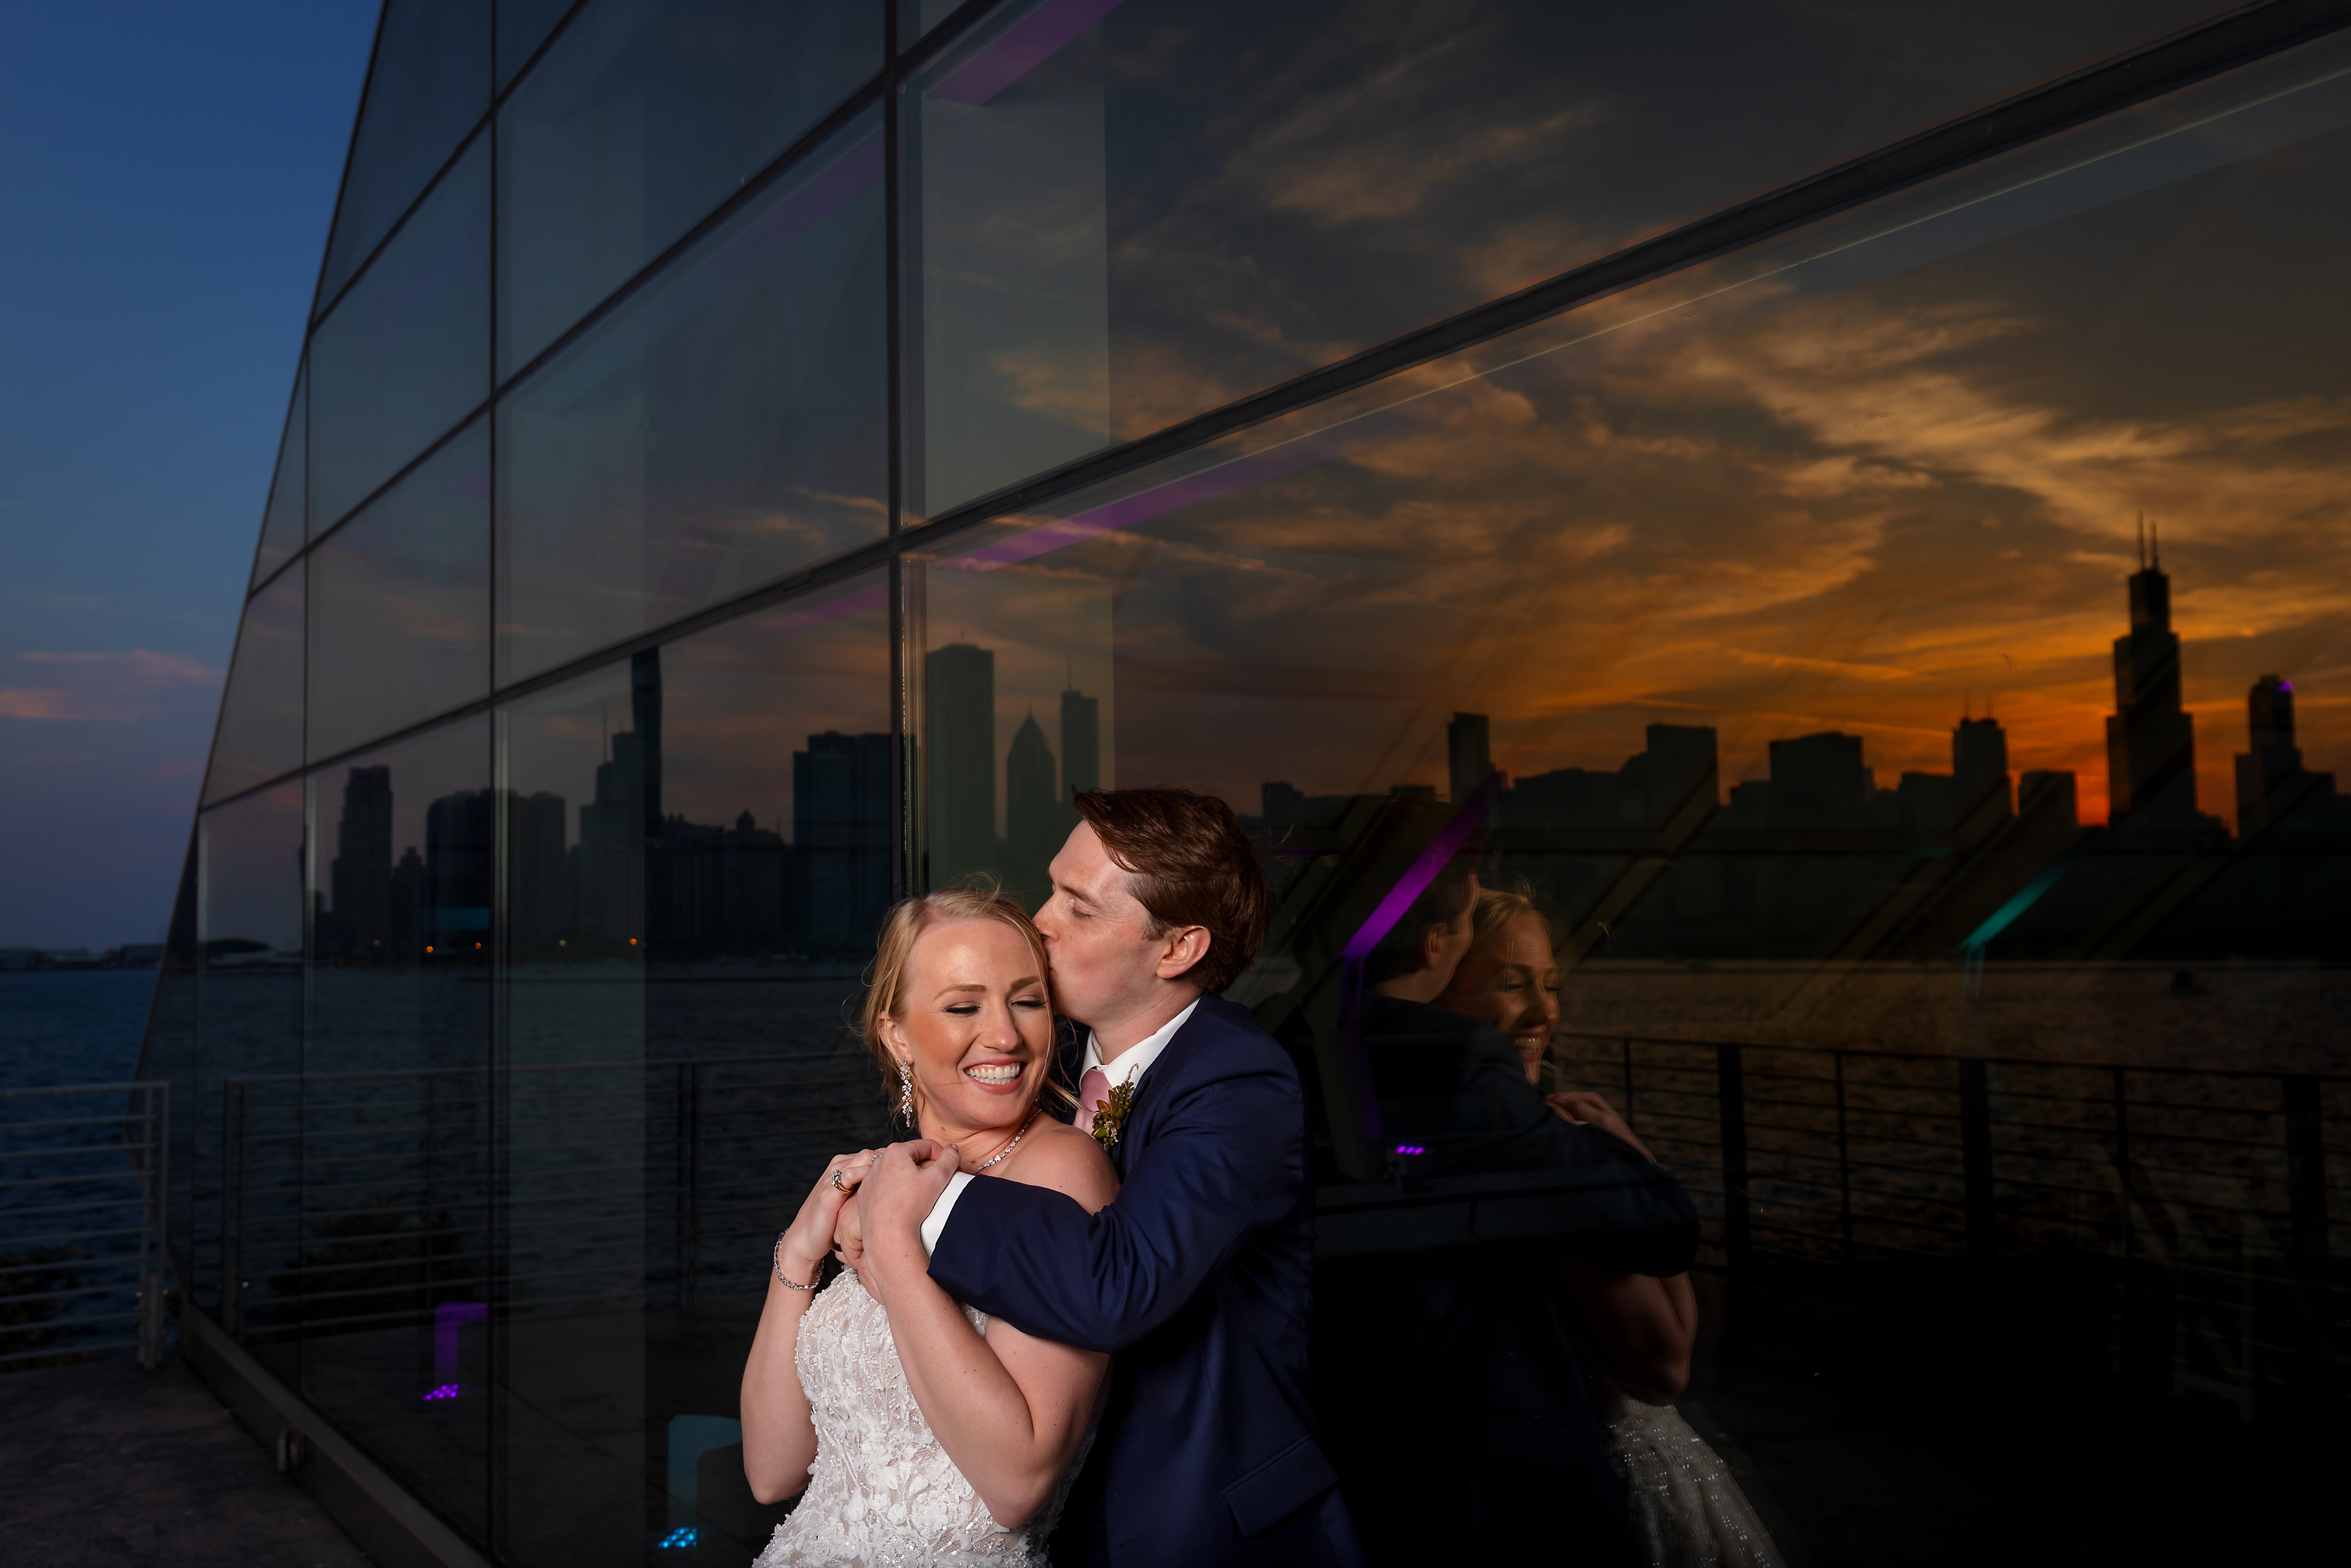 sunset portrait of bride and groom with reflection of city at Adler Planetarium in Chicago